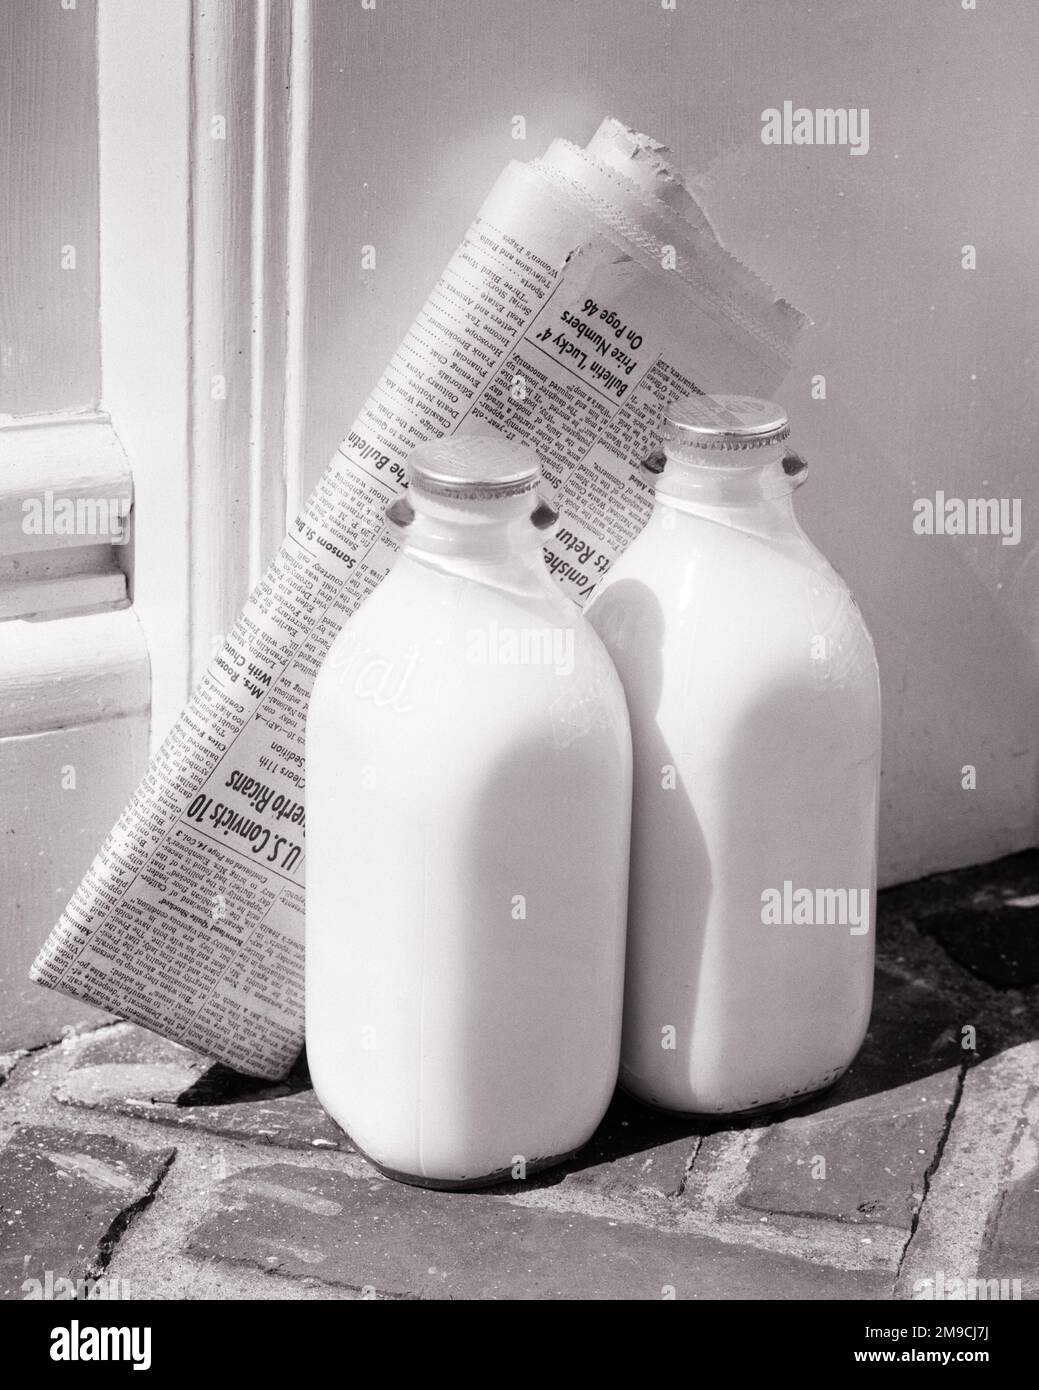 https://c8.alamy.com/comp/2M9CJ7J/1950s-two-glass-bottles-of-milk-and-a-newspaper-on-front-doorstep-a-regular-daily-delivery-s6810-har001-hars-nutritious-quarts-deliveries-doorstep-glass-bottles-protein-quart-regular-beverages-black-and-white-convenience-daily-har001-old-fashioned-2M9CJ7J.jpg